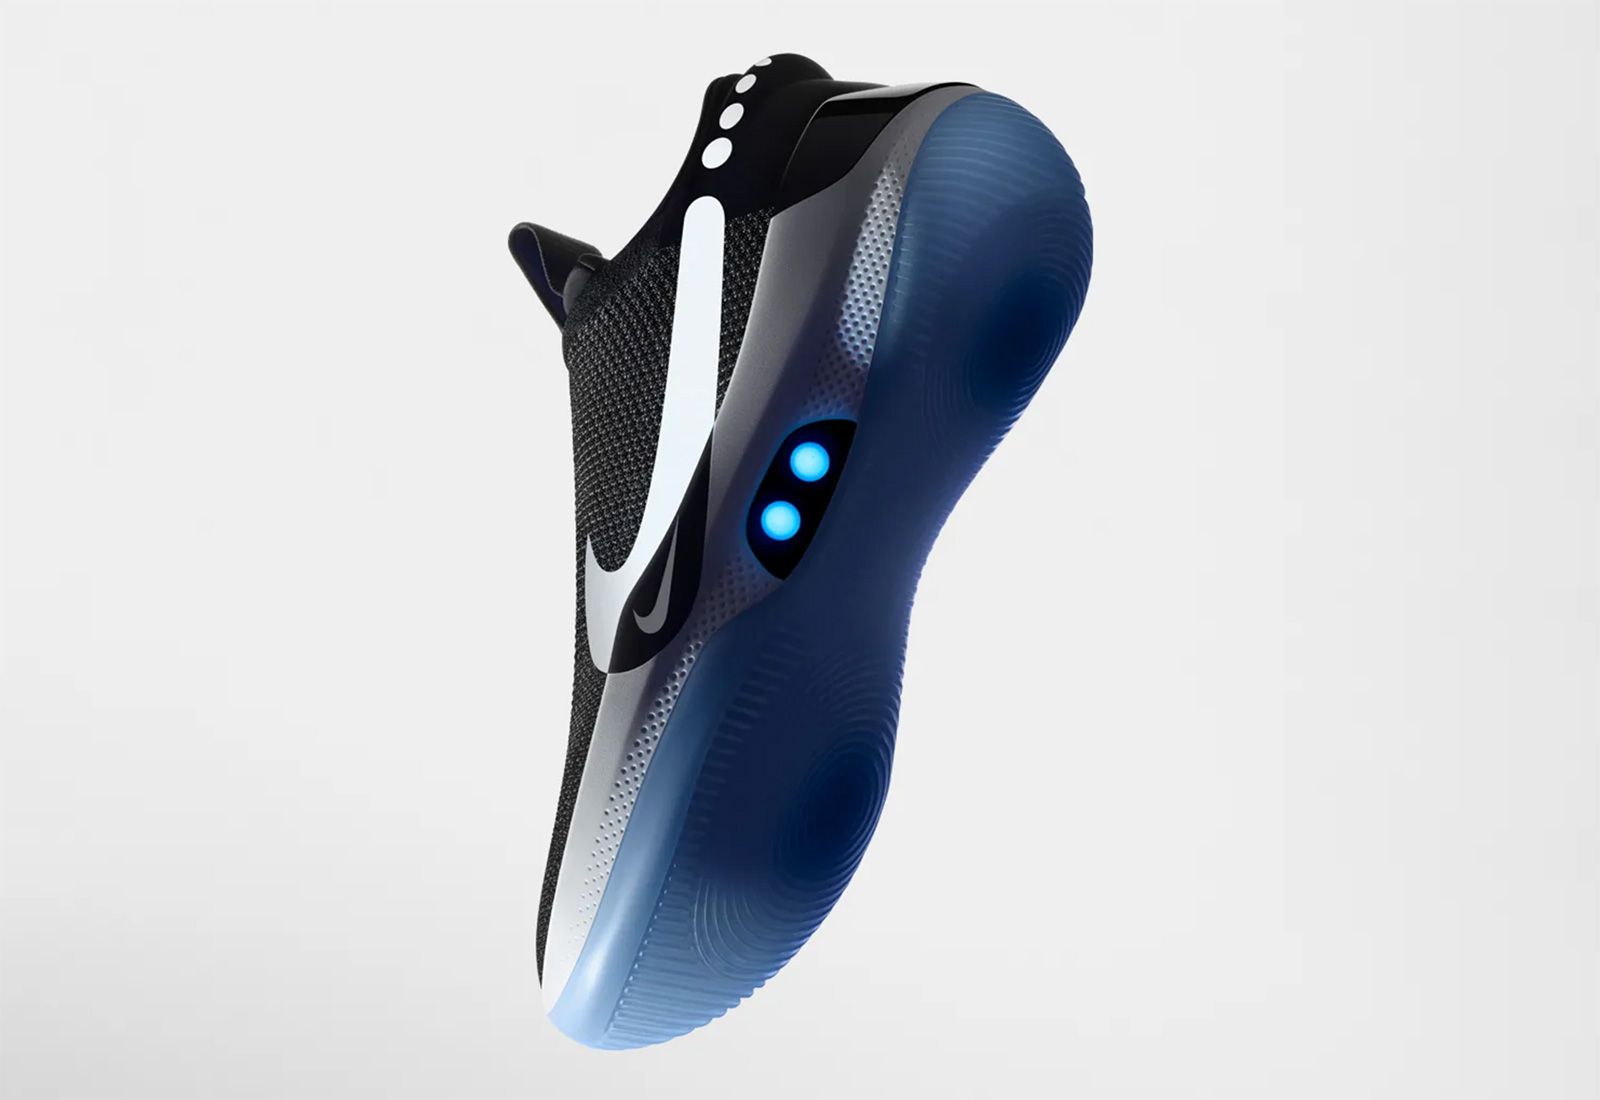 Tested the Auto-Lacing Nike Adapt and Worth $350